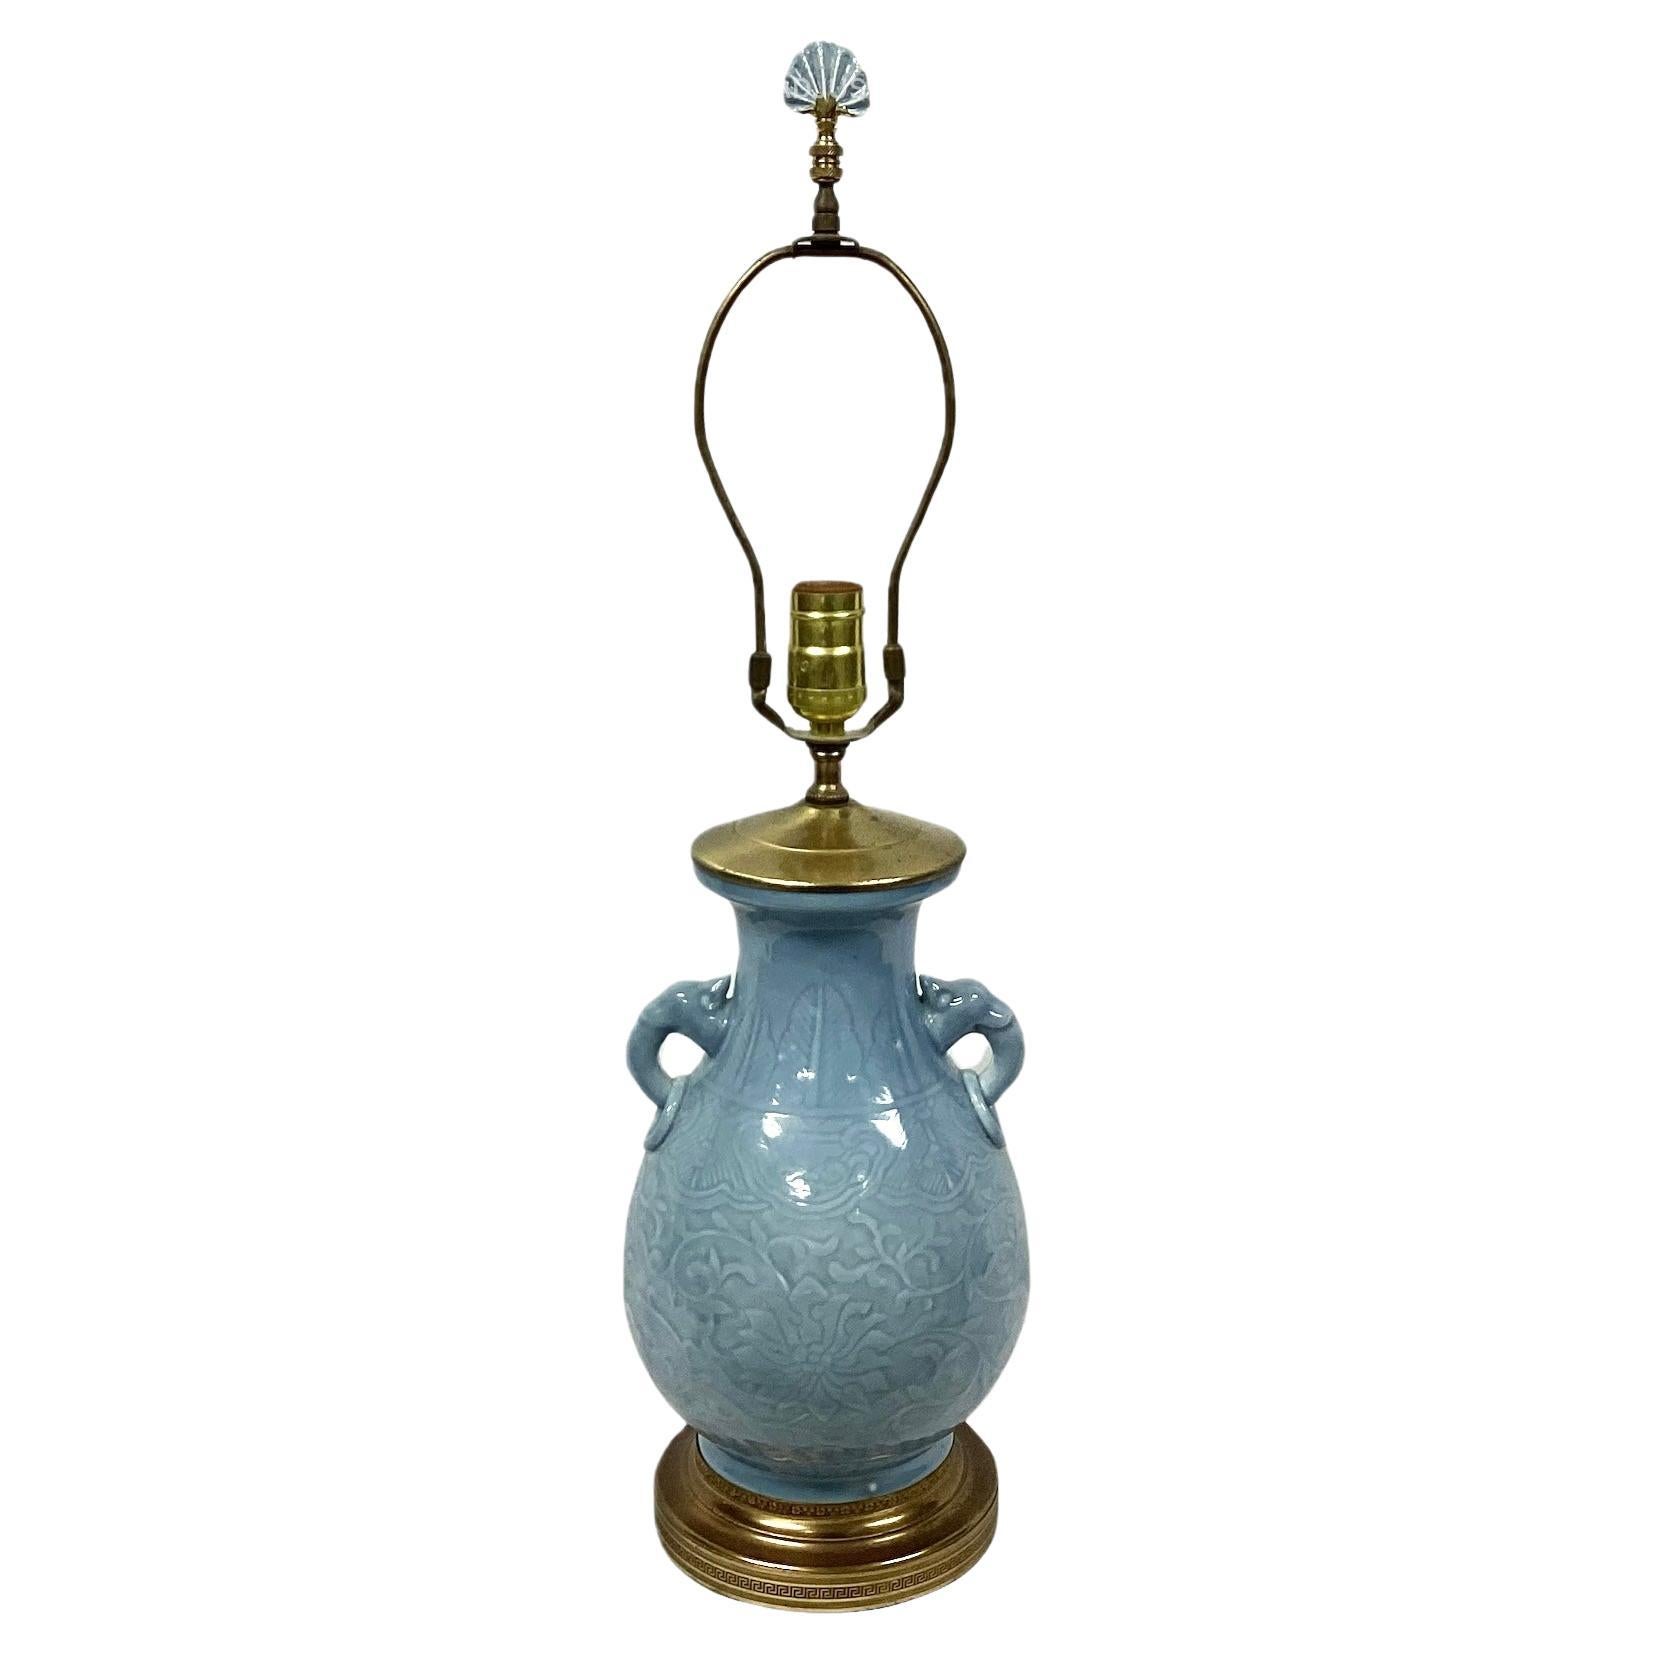  Chinese Gilt Brass Mounted Celadon Porcelain Lamp For Sale